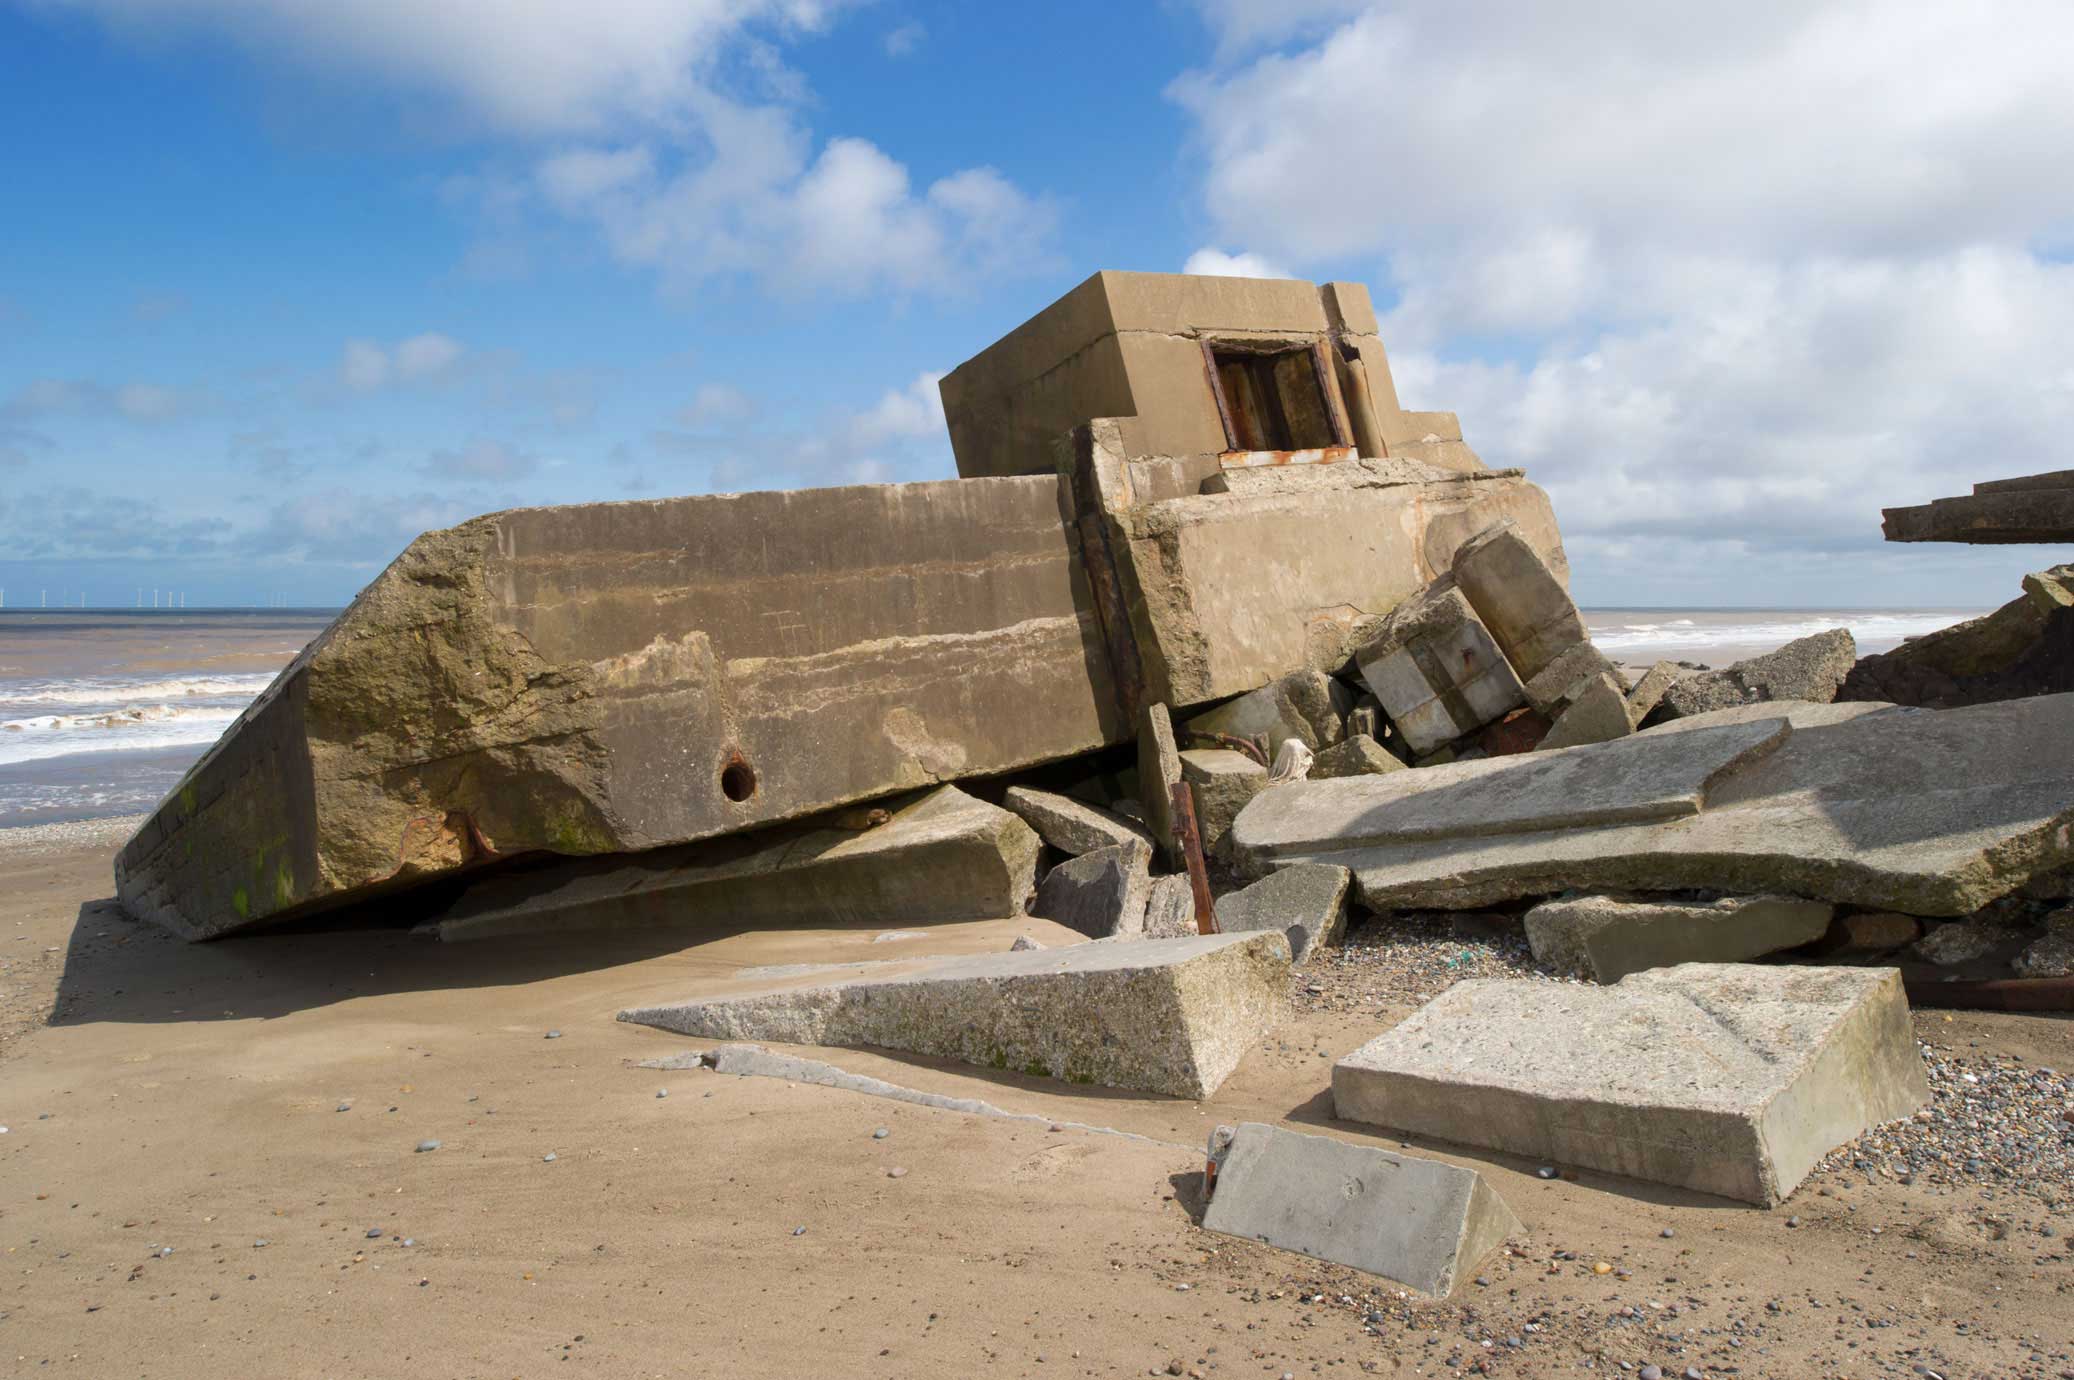 The remains of a concrete defensive emplacement that has collapsed onto a beach.